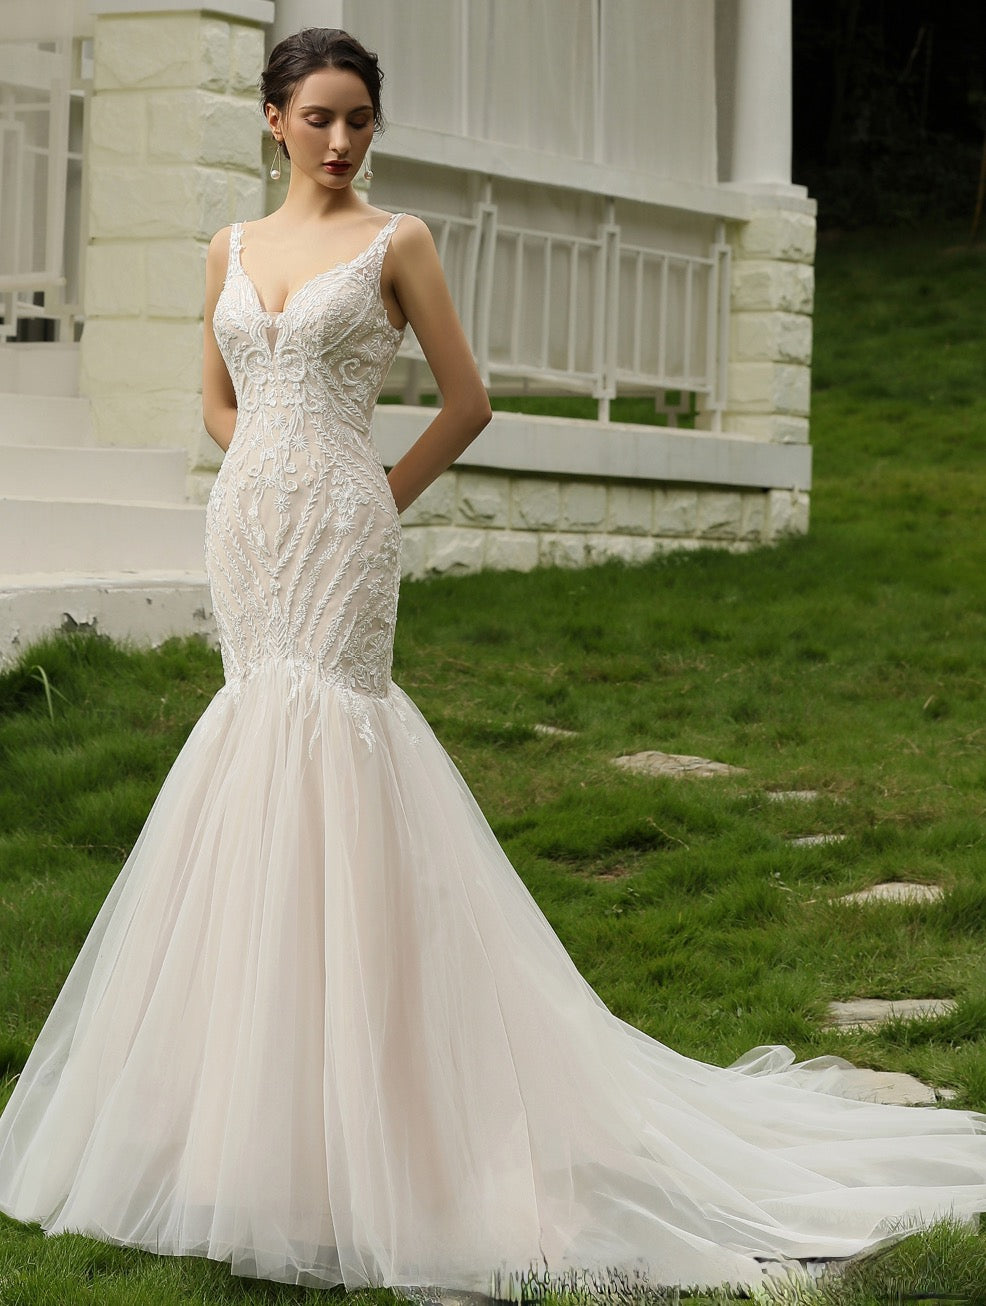 Beaded Lace Plunging Neck Caped Mermaid Wedding Gown - Xdressy